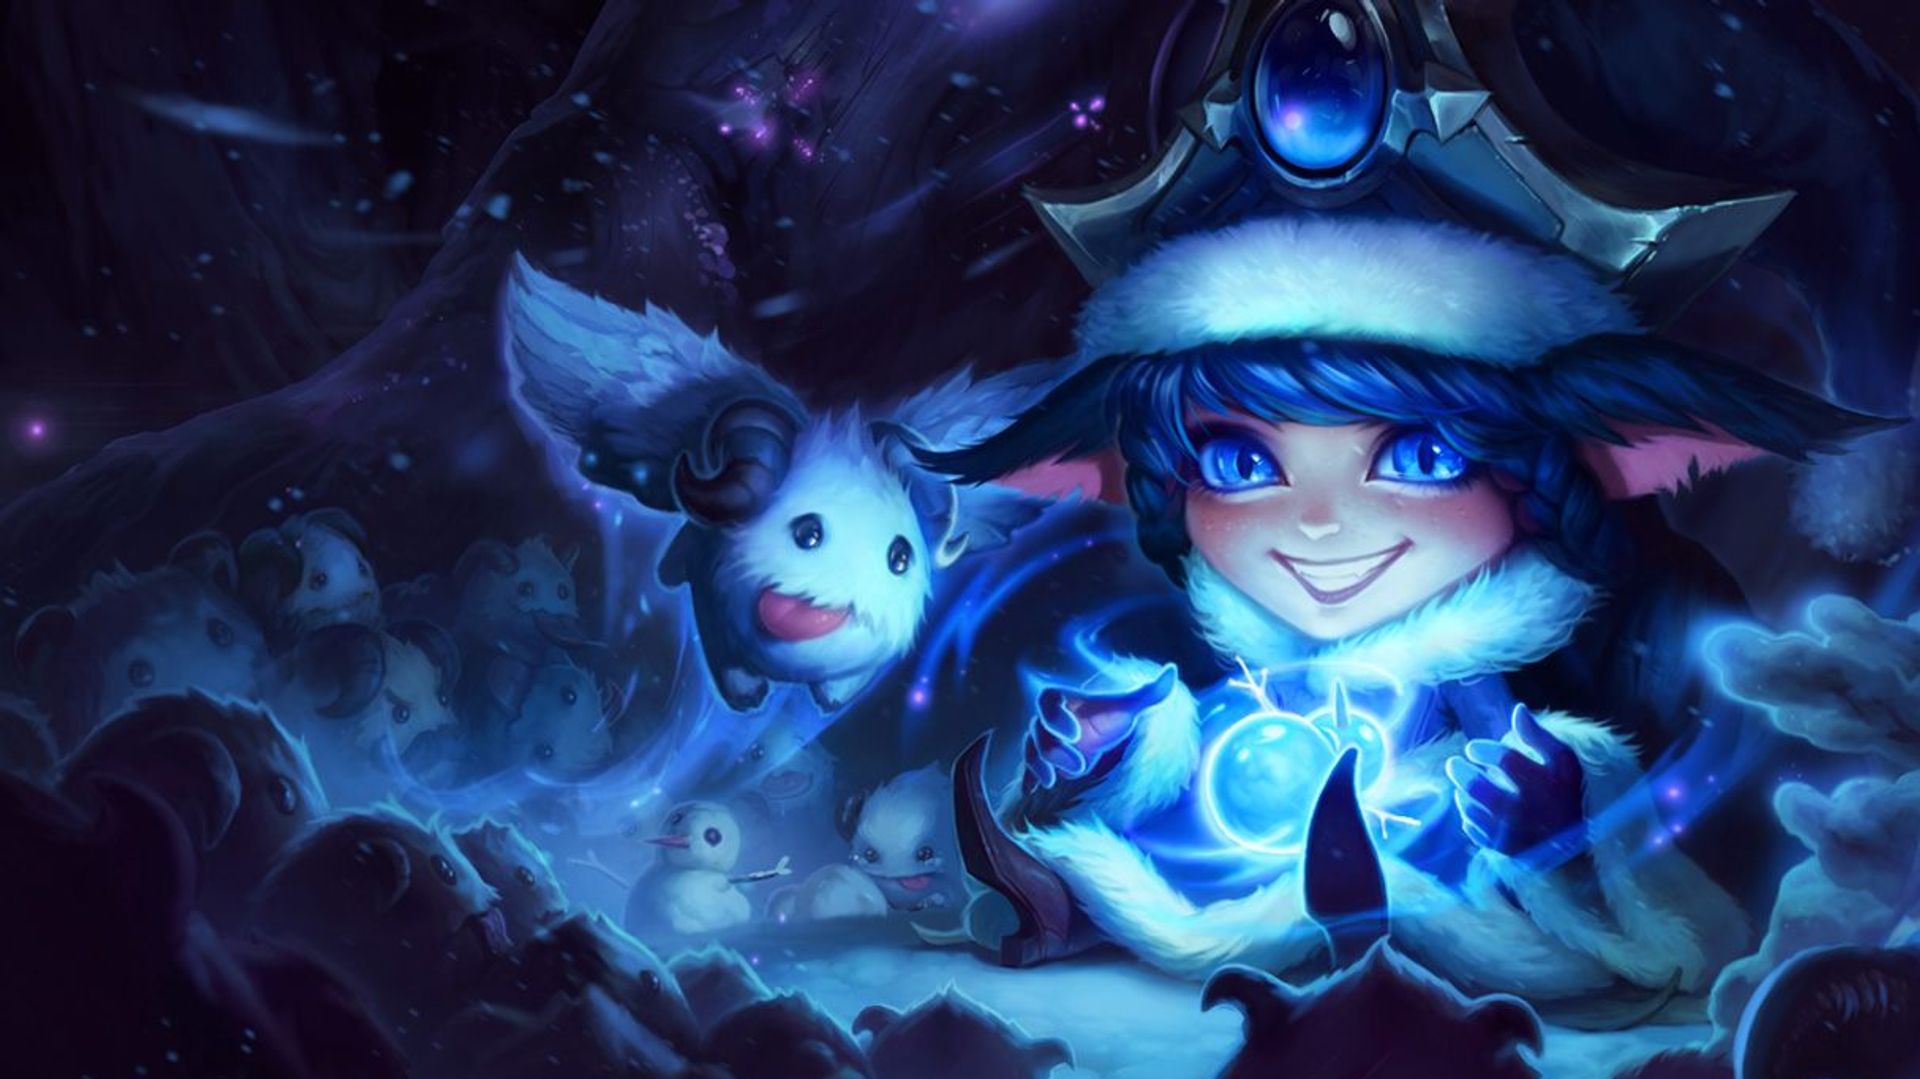 Lulu Build Guides :: League of Legends Strategy Builds, Runes and Items